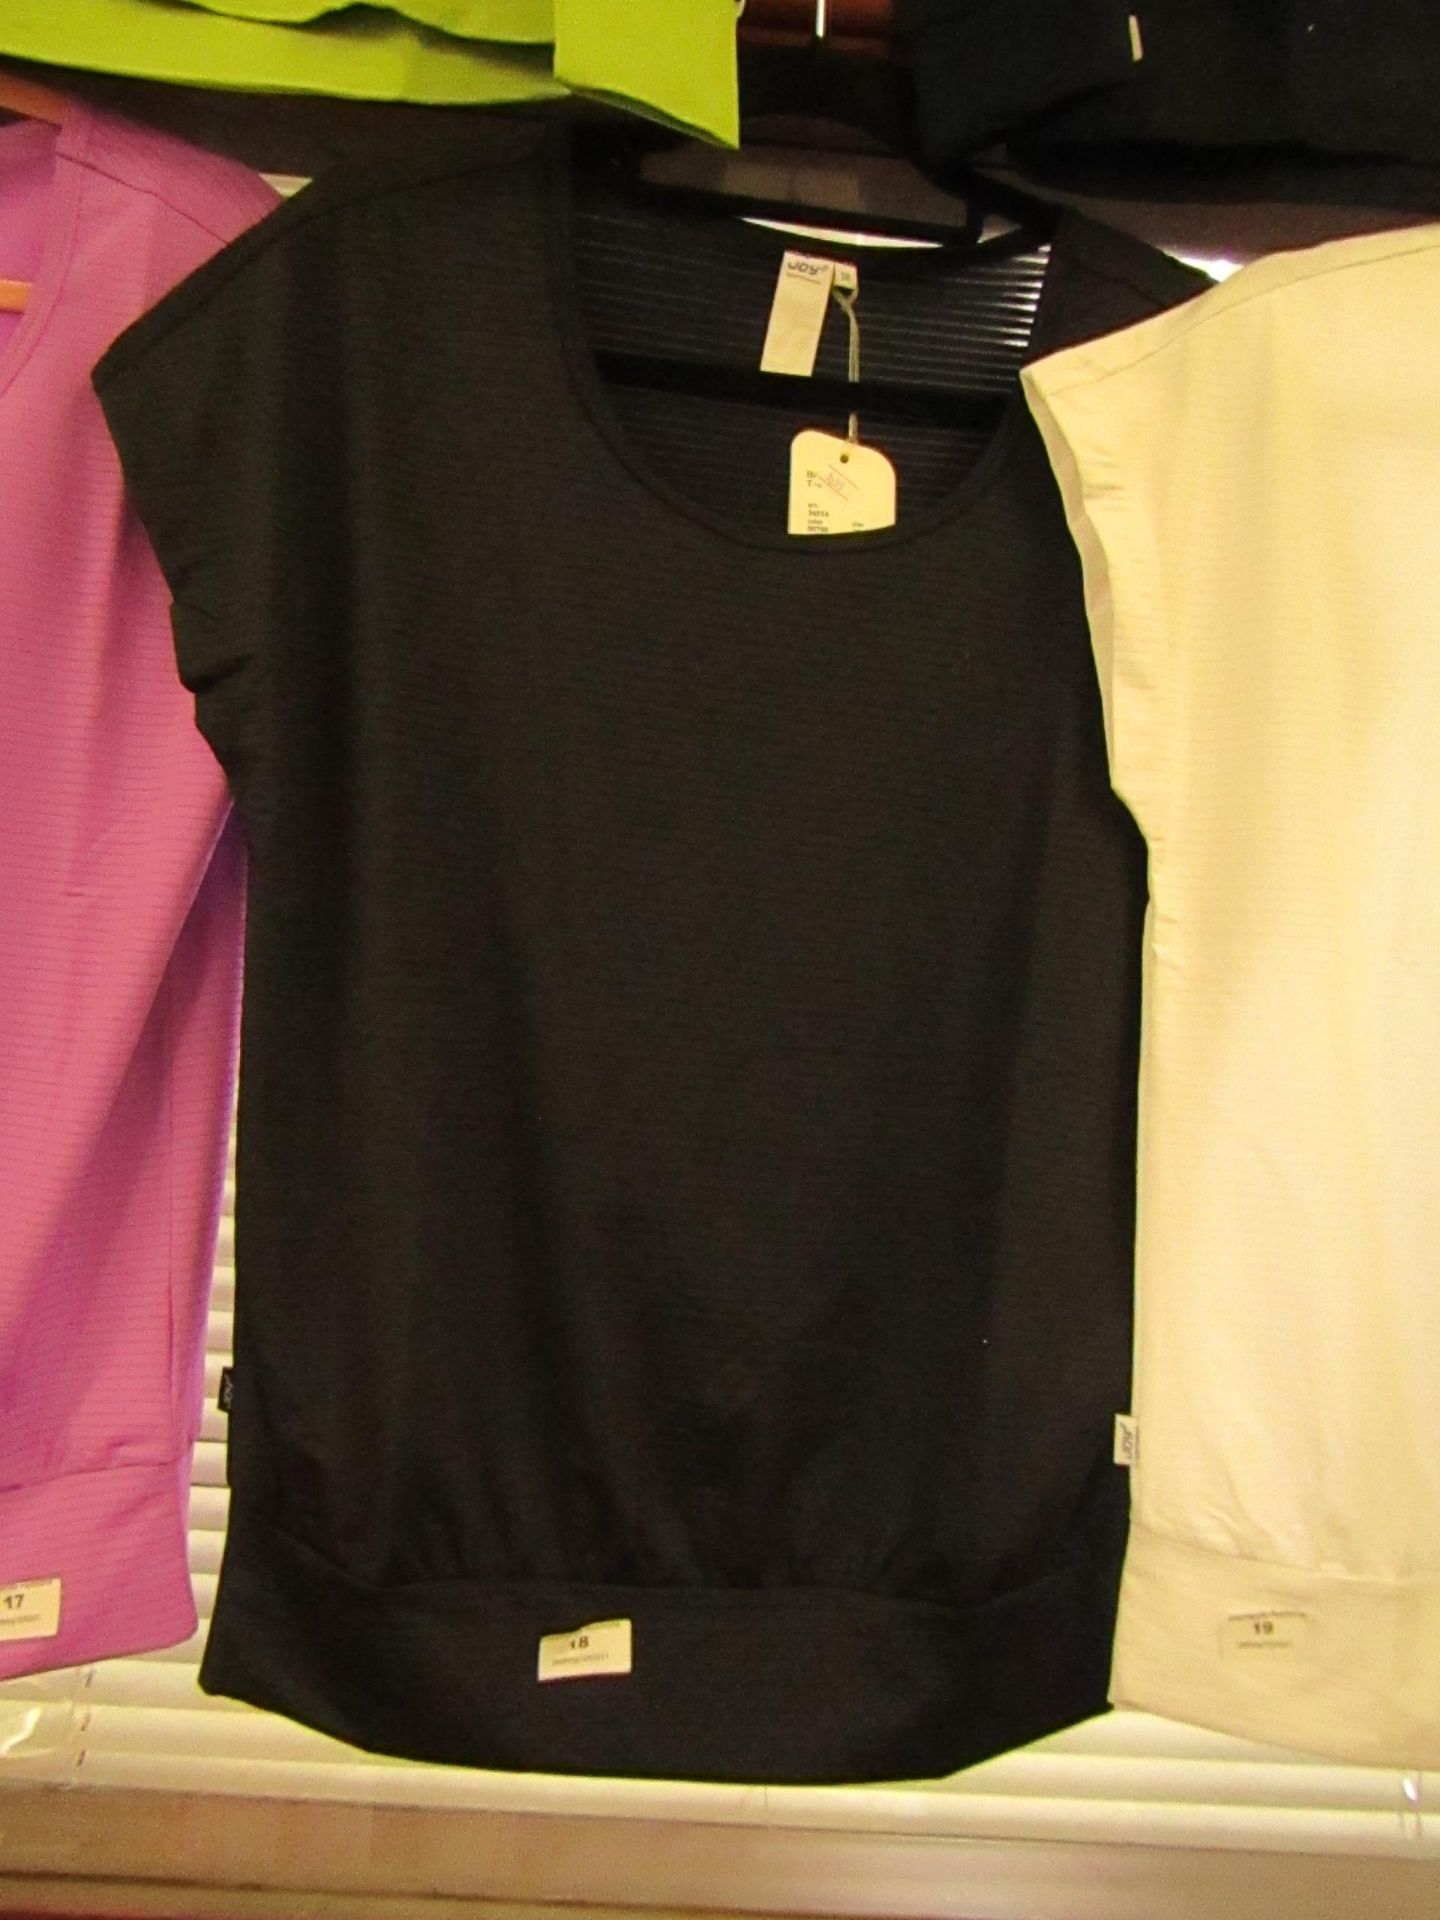 1 x Joy Sportswear Top size 38 new with tag see image for design